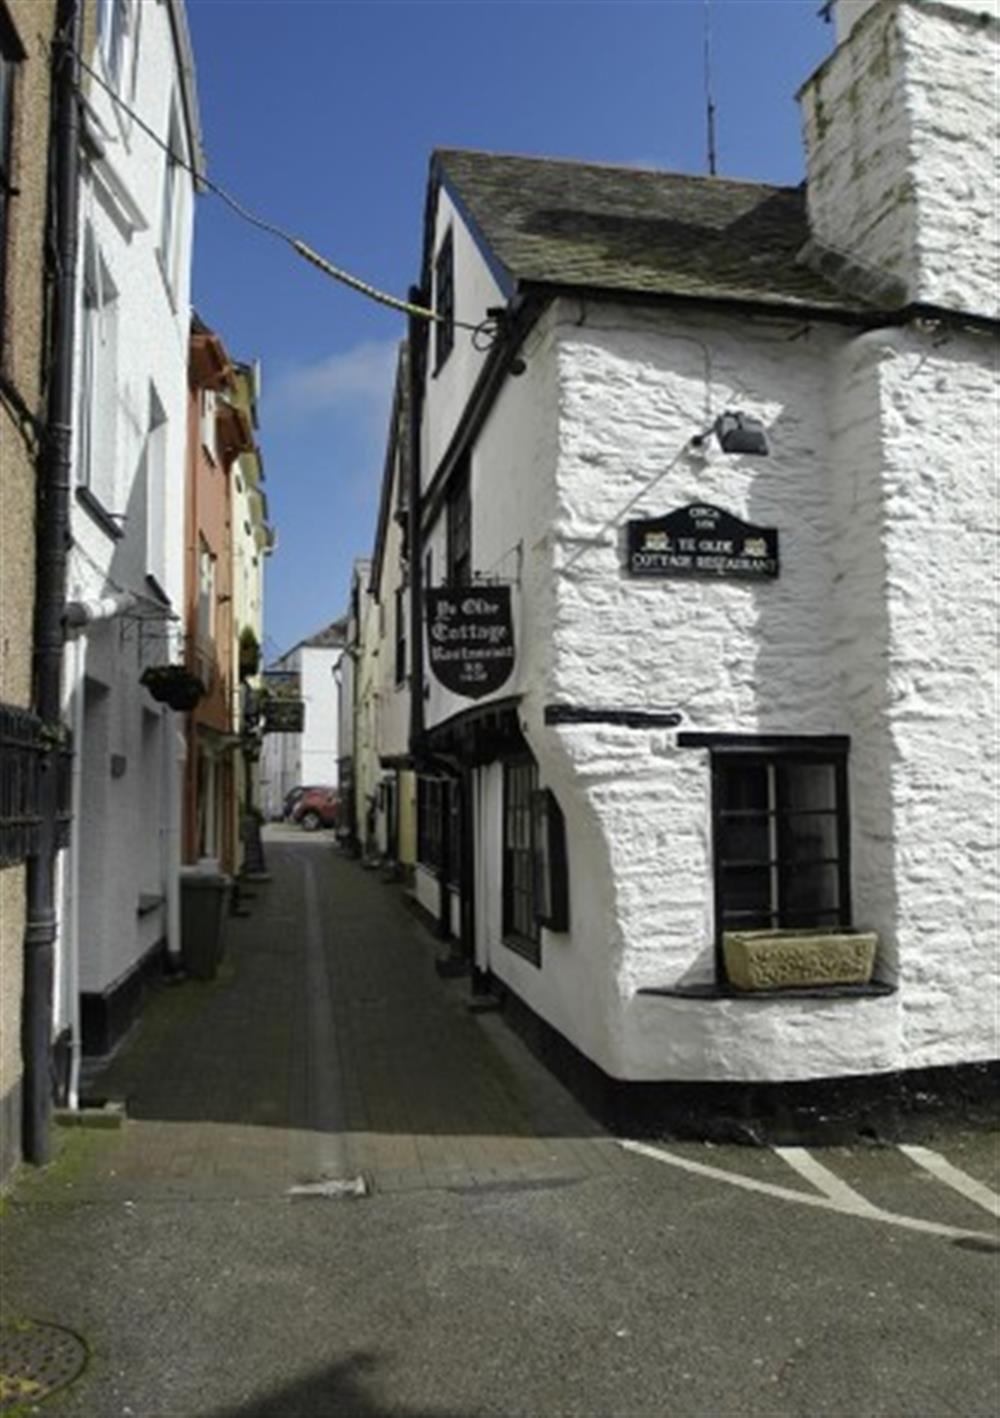 There are plenty of back streets in Looe to explore